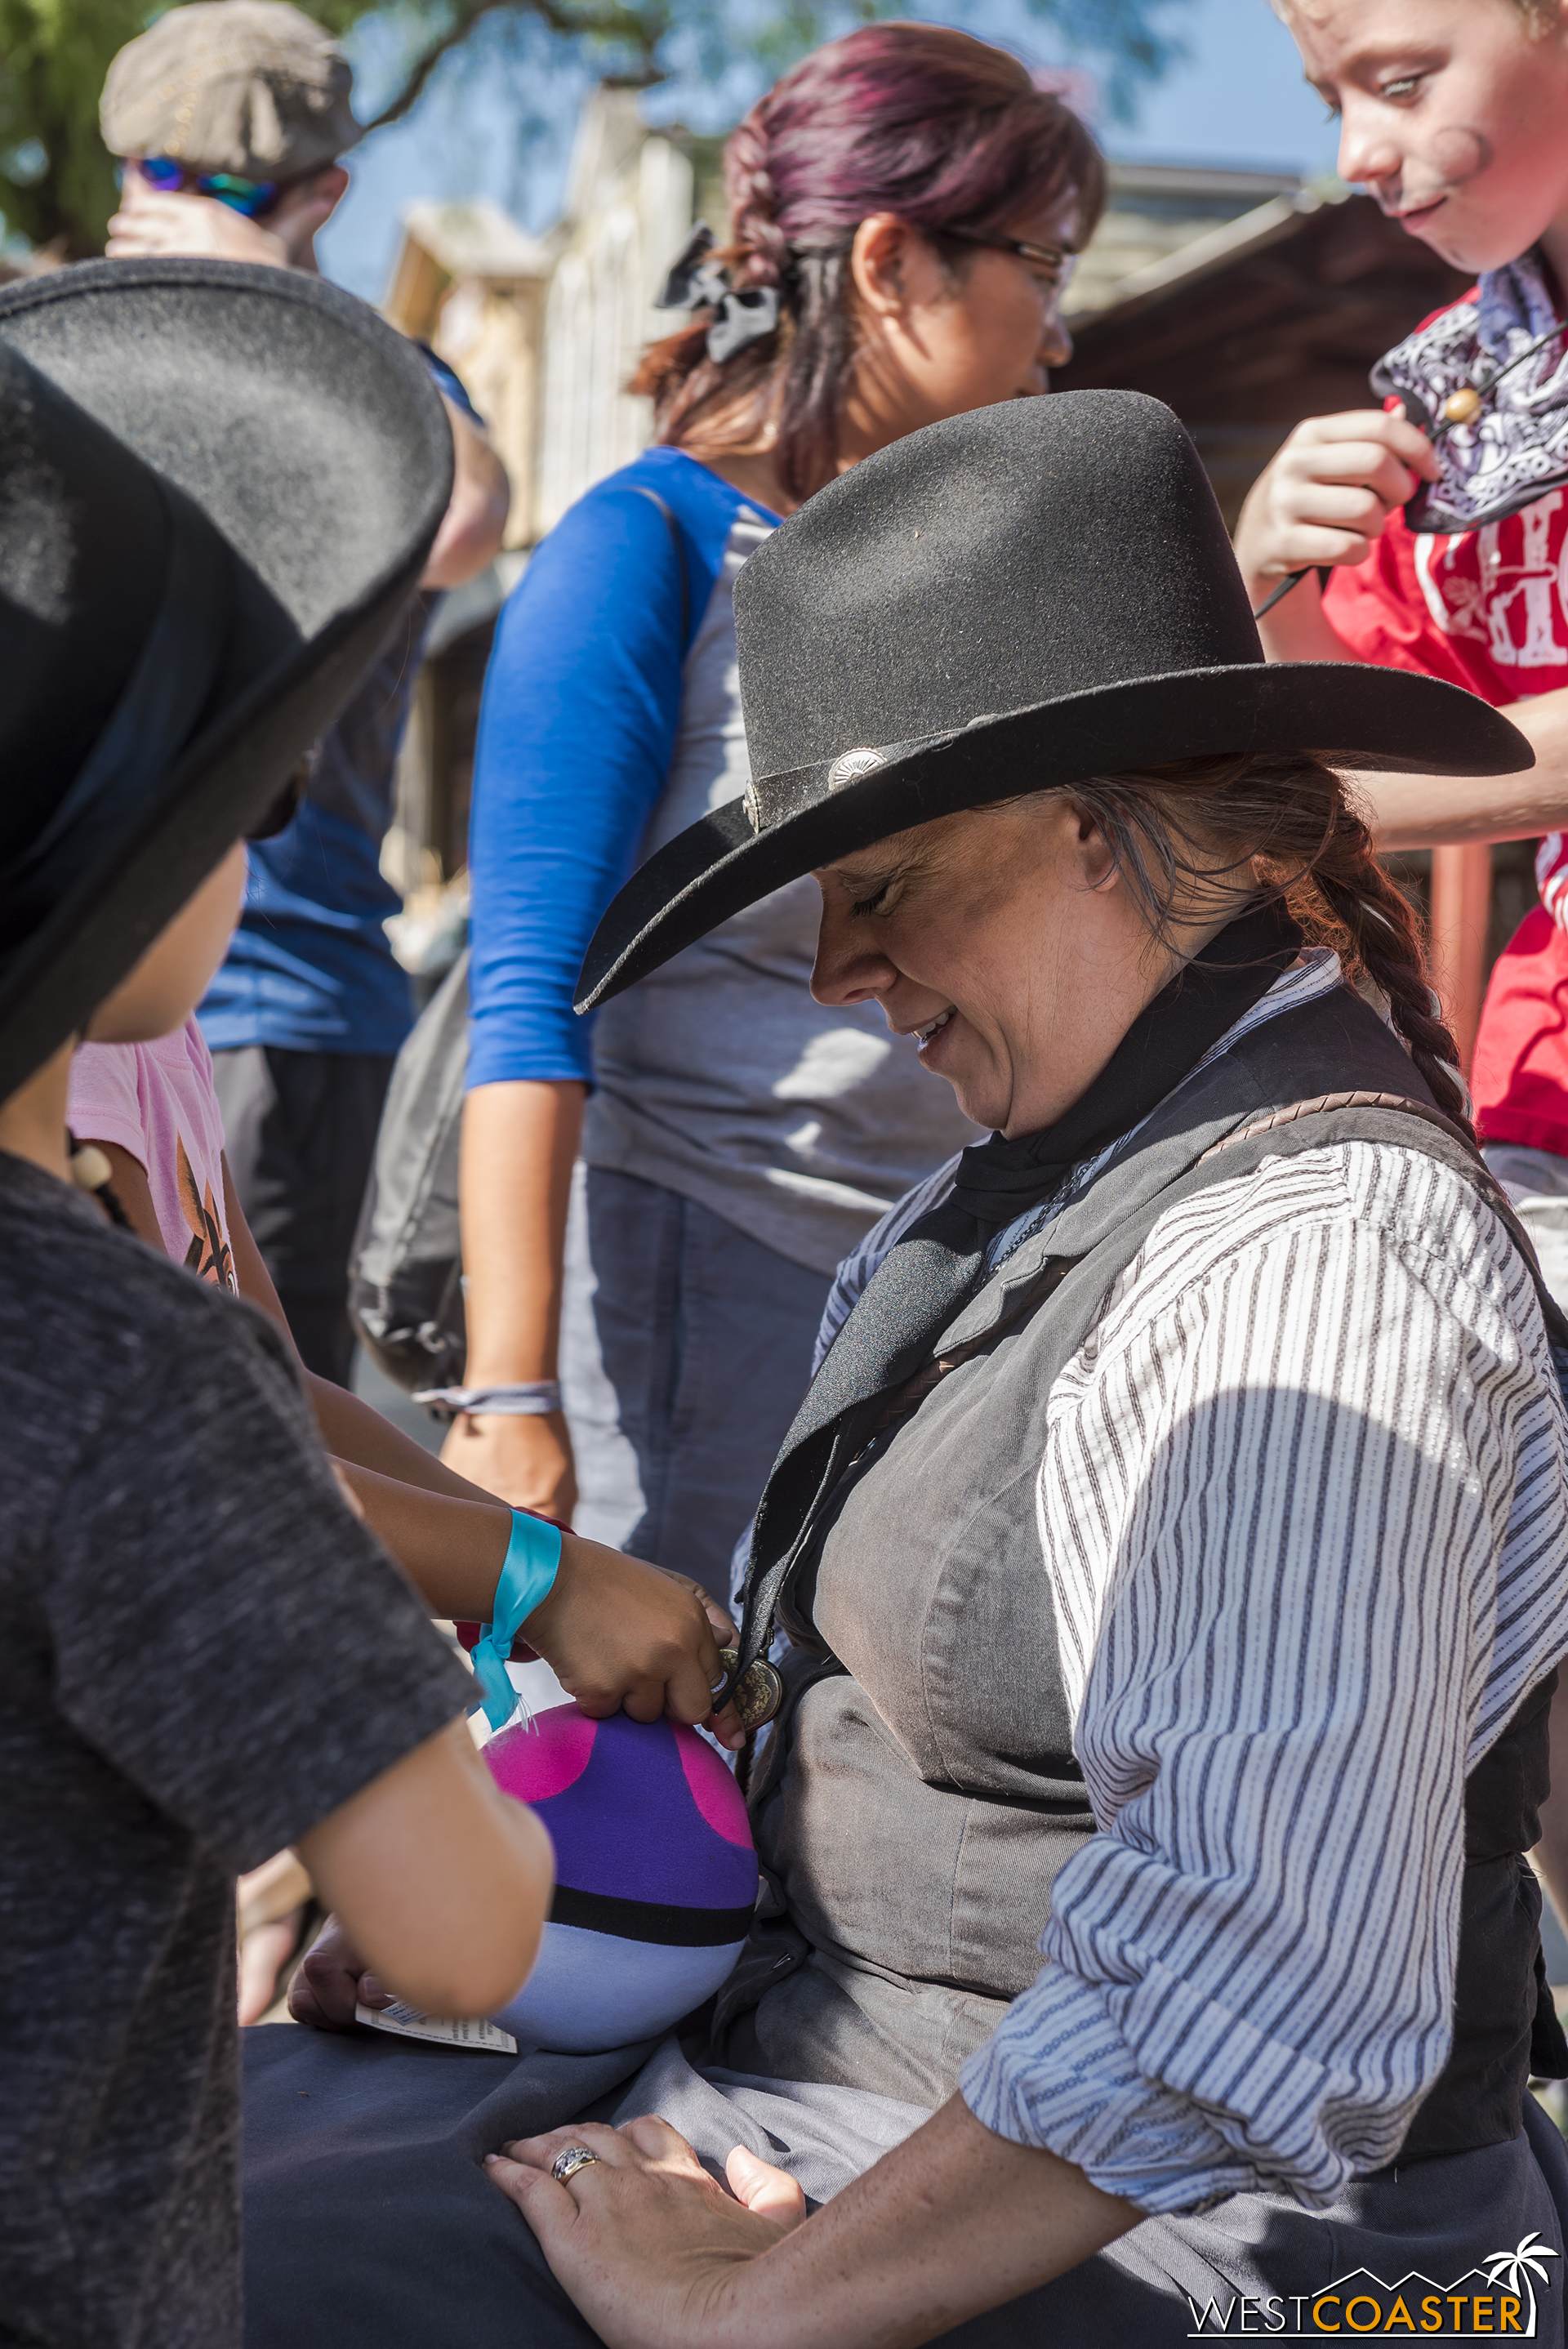  The authentic, emotional connections made at Ghost Town Alive are heart-warming to witness. 